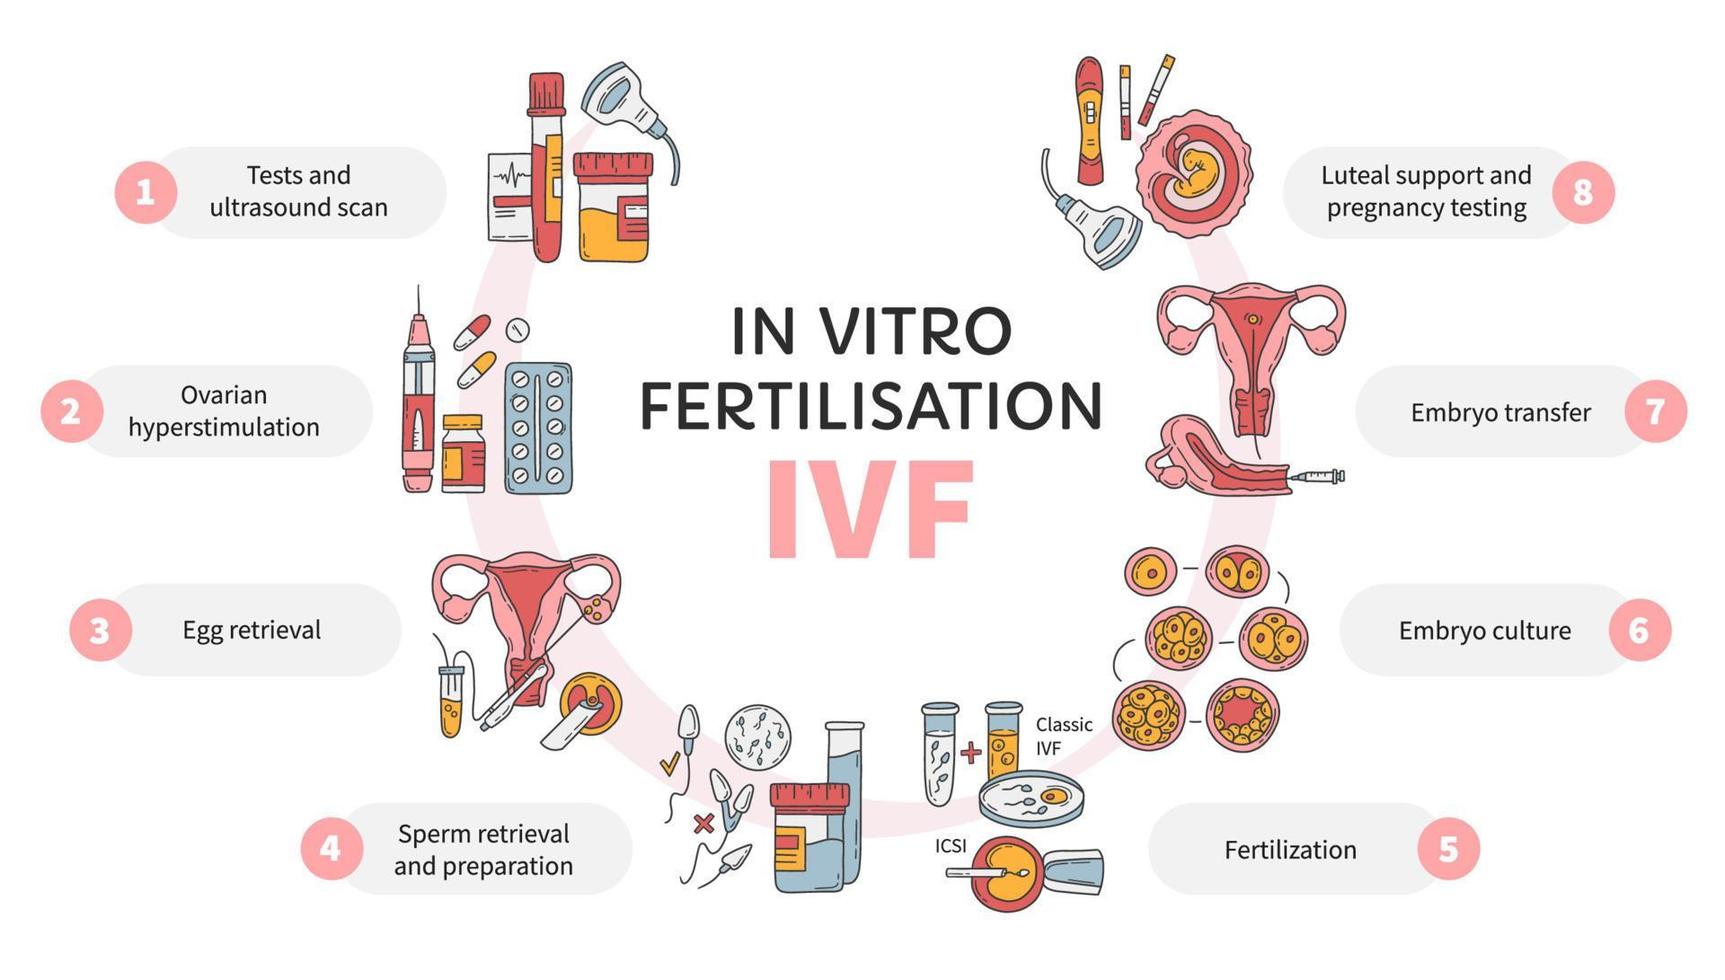 In Vitro fertilization IVF vector circle infographic, infertility treatment scheme. Ovarian hyperstimulation, artificial insemination, embryo culture, luteal support. Medical procedure for pregnancy